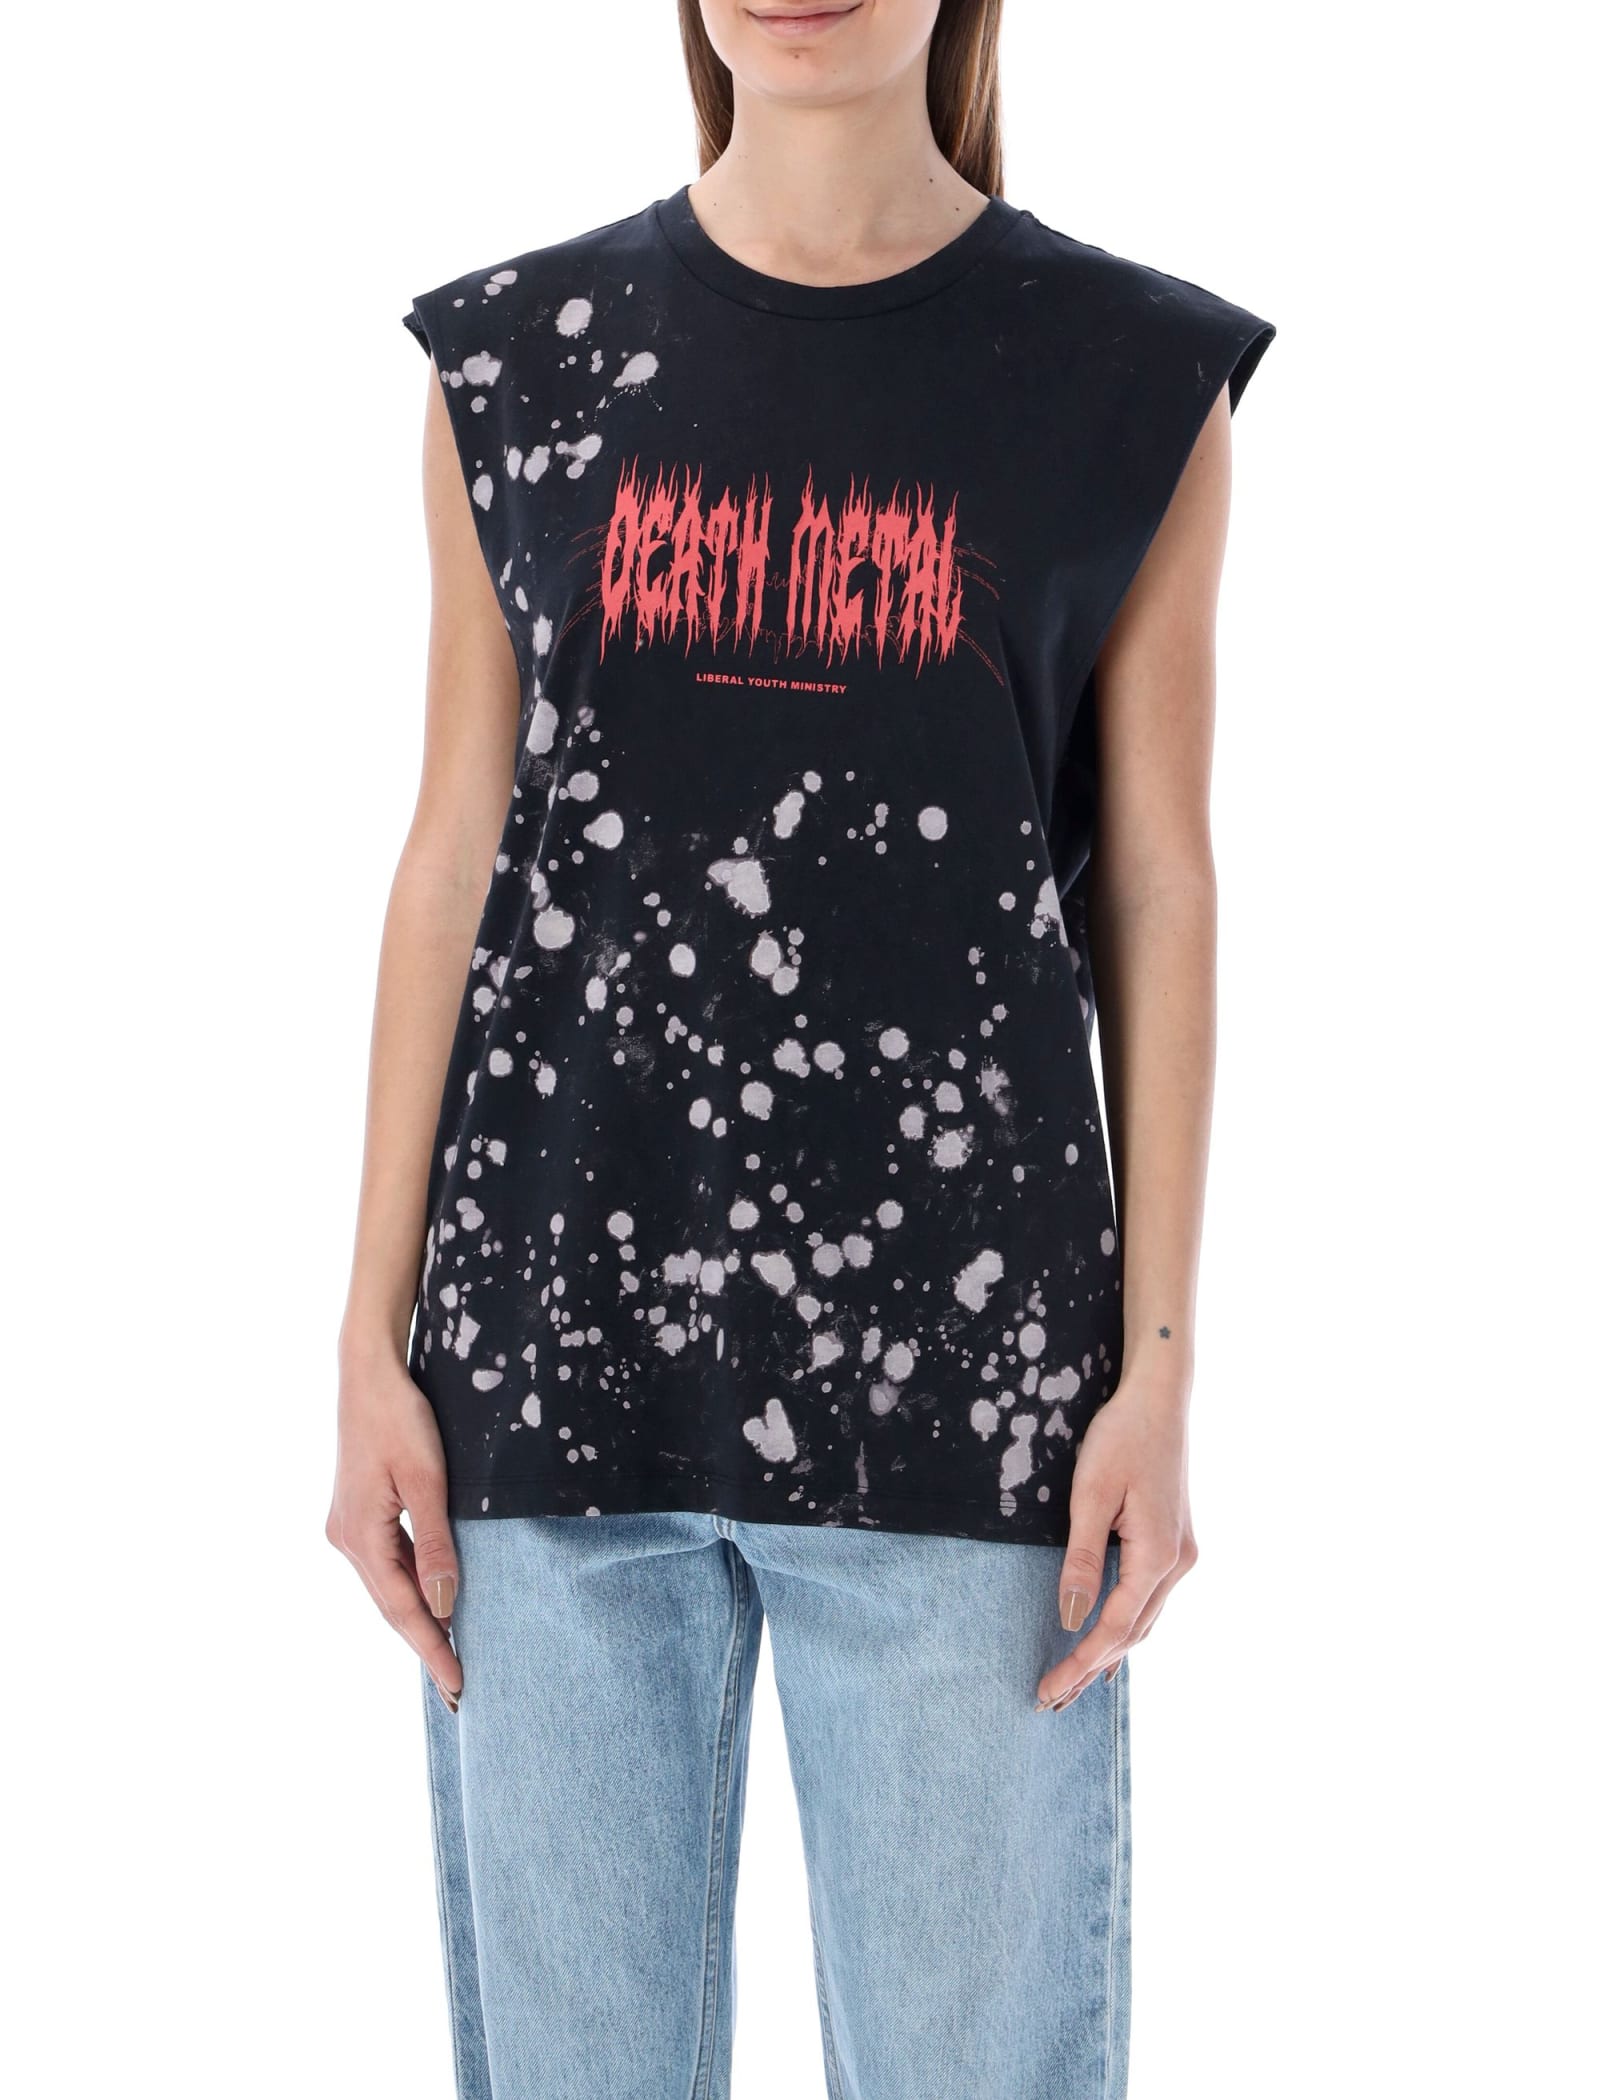 LIBERAL YOUTH MINISTRY DEATH METAL T-SHIRT